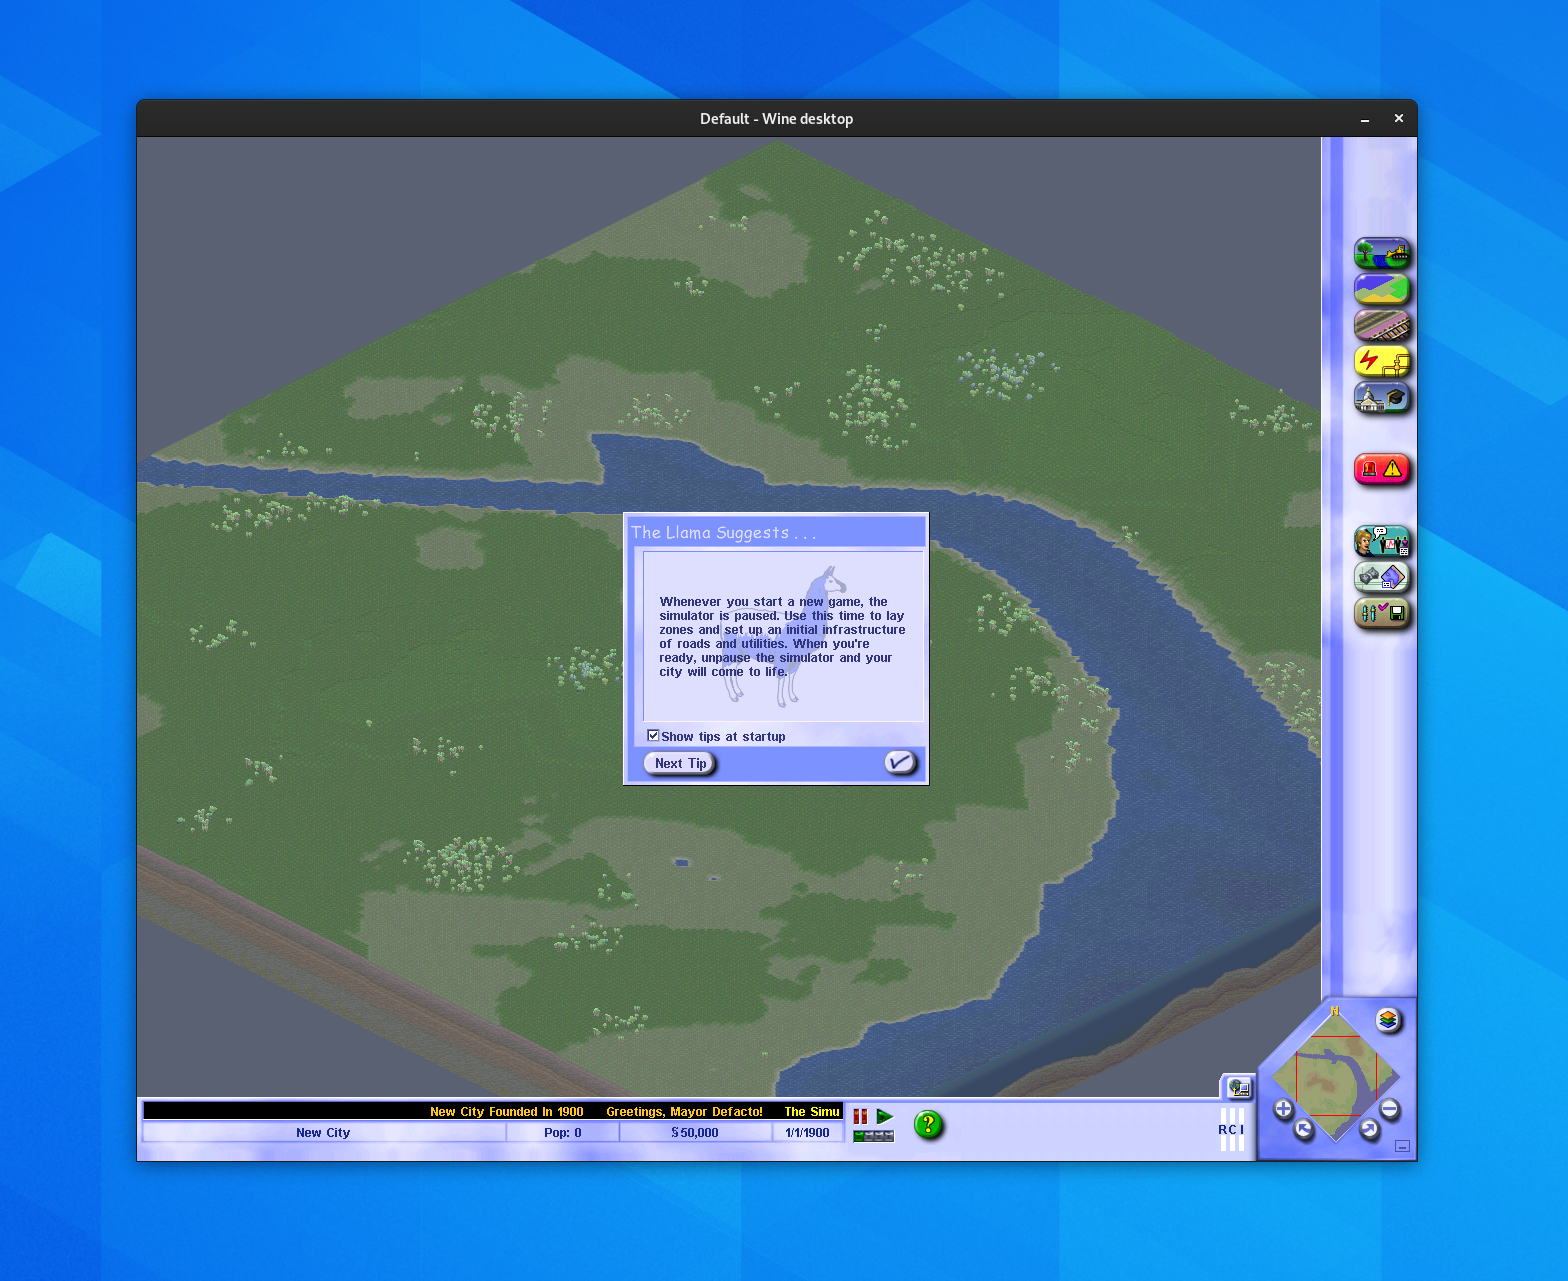 SimCity 3000 Unlimited running through Wine on Linux